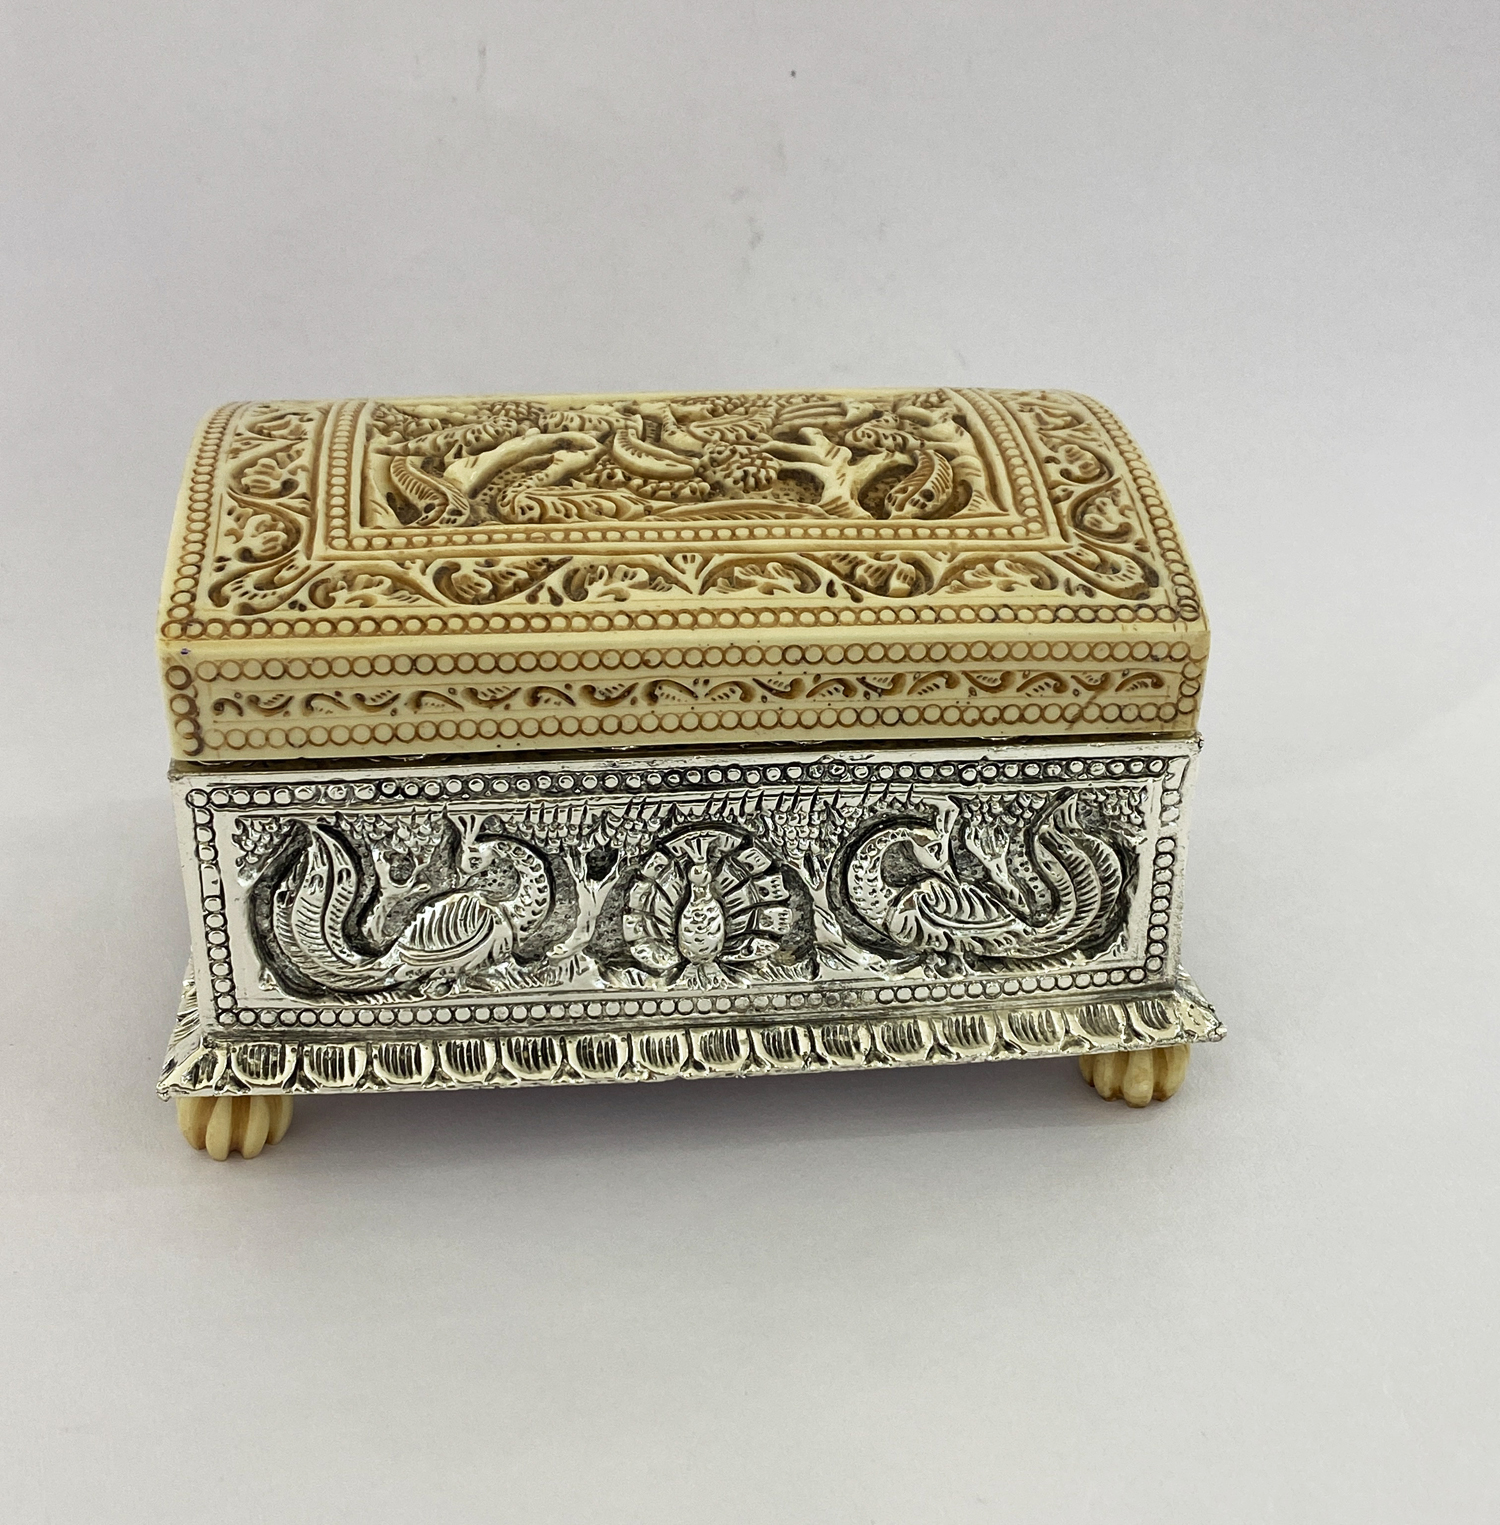 Carved Silver Jewelry Box Peacock Motif | 7 Inch